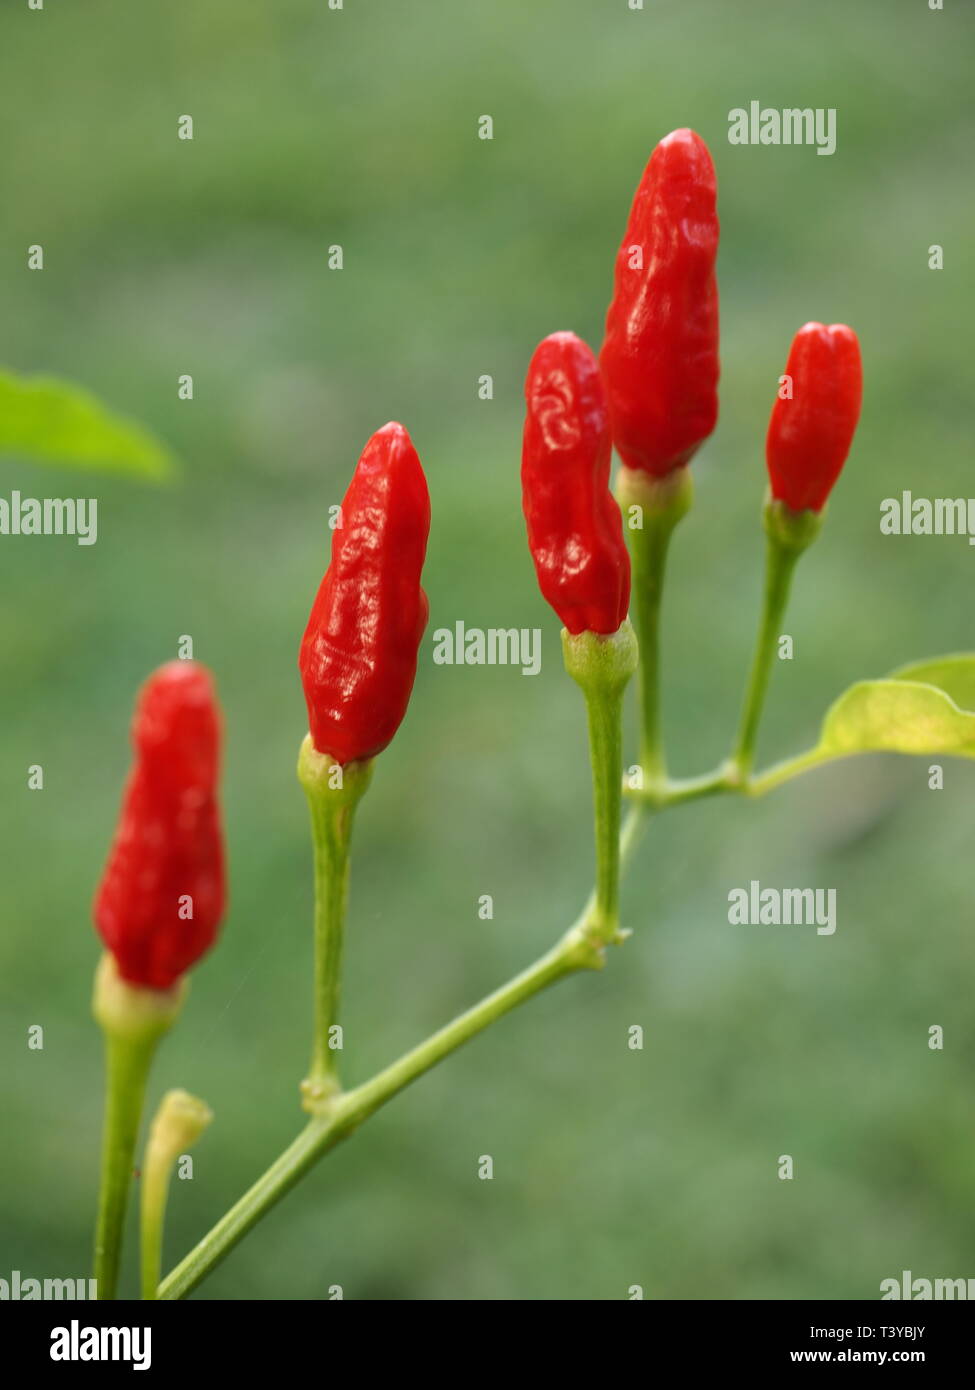 Red, hot, birdseye chillies on a bush in a garden. Spicey ingredients for hot food. Hot red peppers for Indian, Mexican and Asian cuisine. Stock Photo